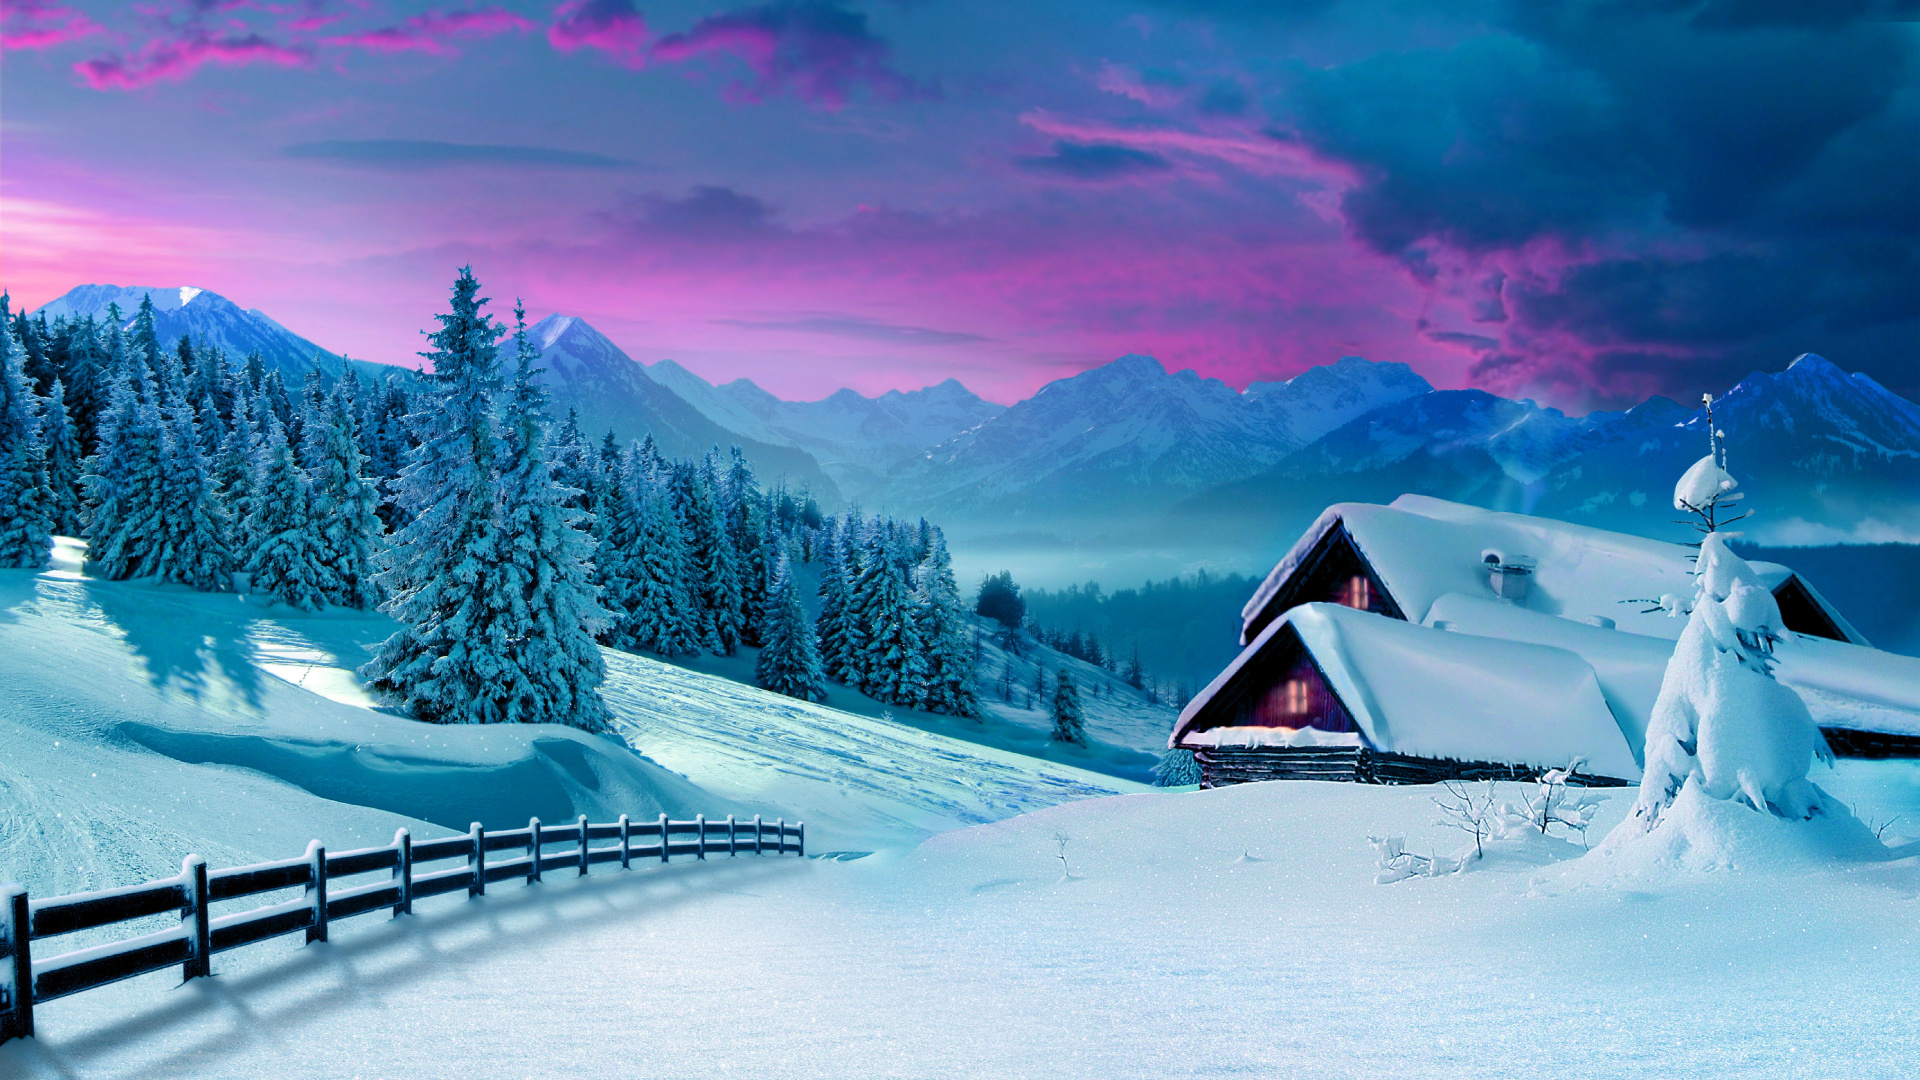 Brown Wooden House on Snow Covered Ground Near Trees and Mountains During Daytime. Wallpaper in 1920x1080 Resolution